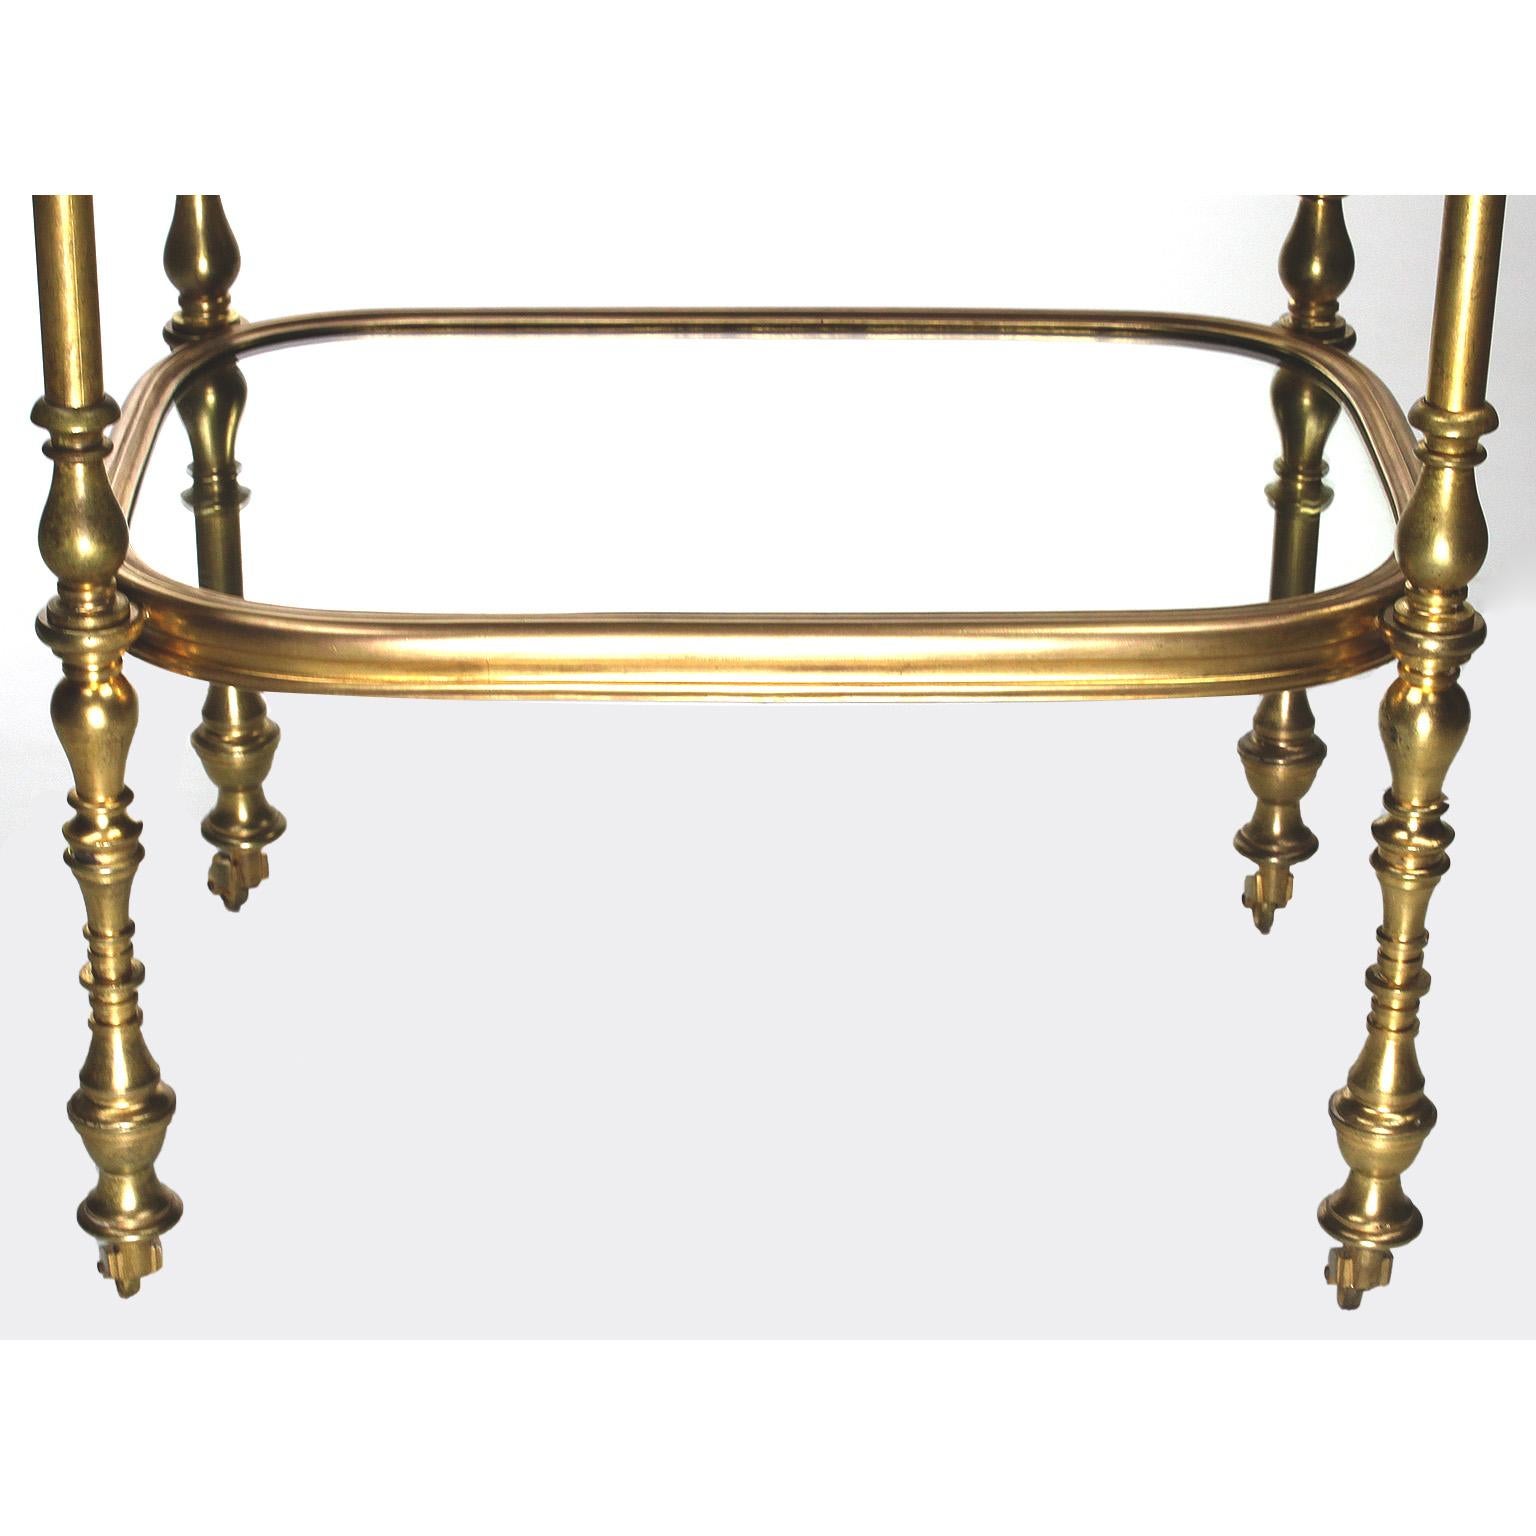 French 19th Century Gilt-Bronze and Pietra Dura Vanity Stand, Attr. Tahan, Paris For Sale 14